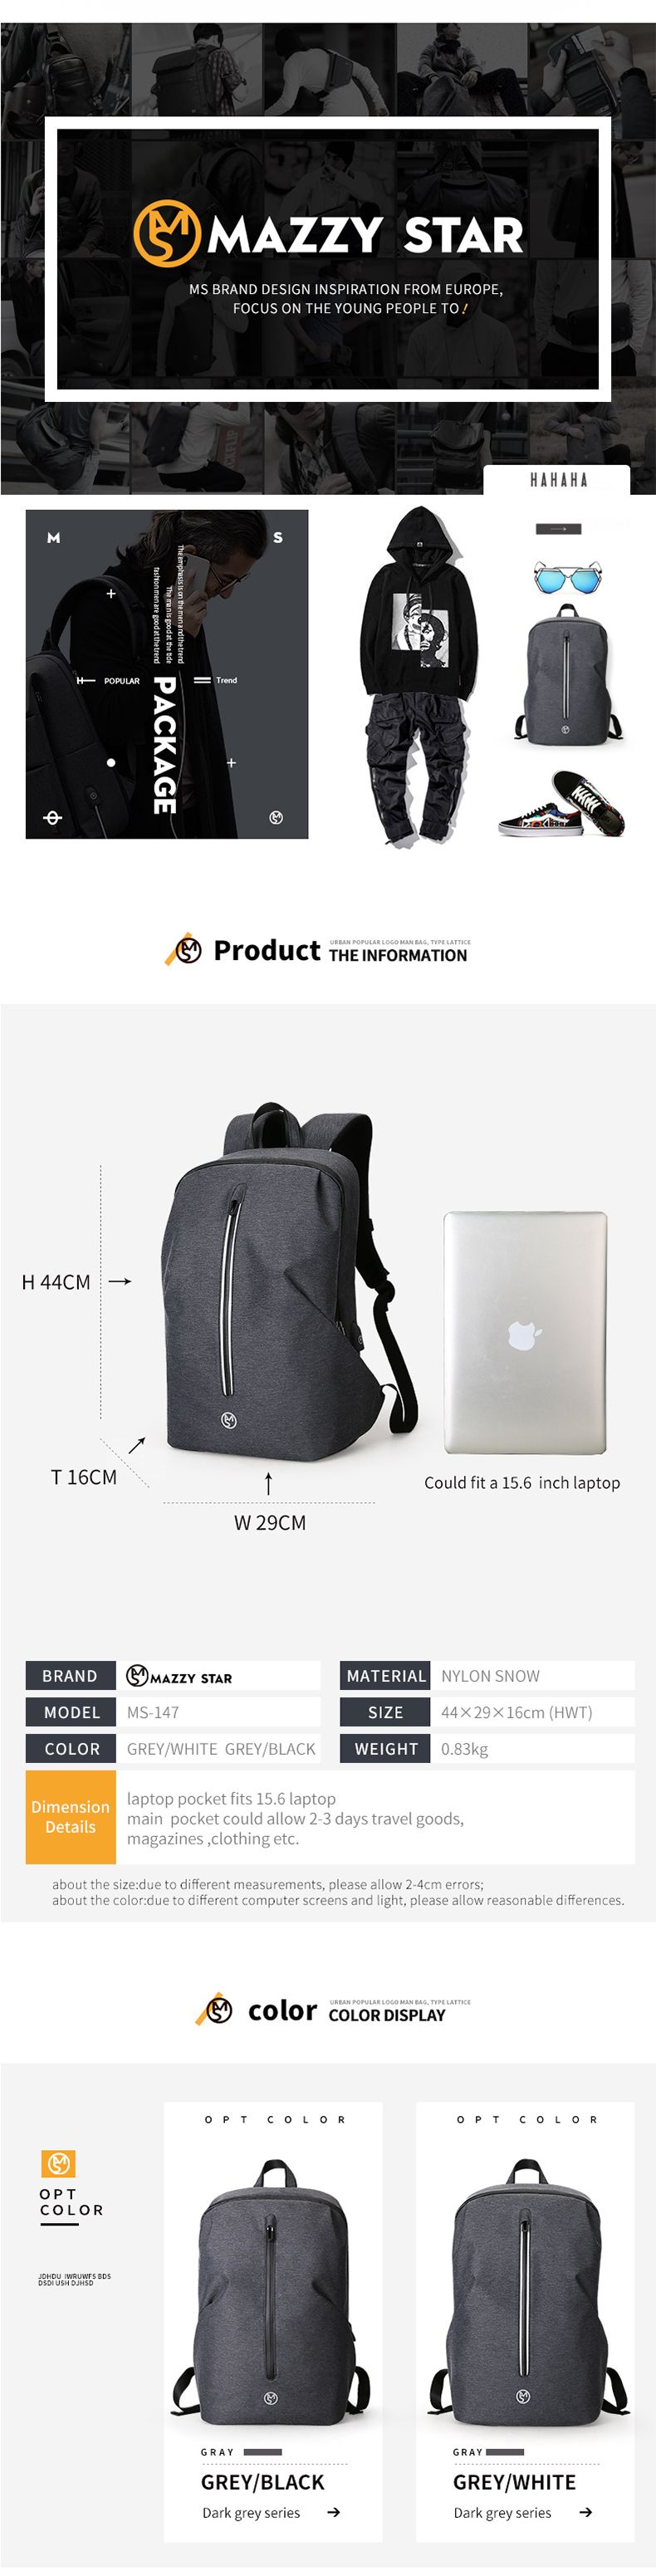 Mazzy-Star-MS_147-15-Inch-Laptop-Backpack-USB-Charging-Anti-thief-Laptop-Bag-Mens-Shoulder-Bag-Busin-1529315